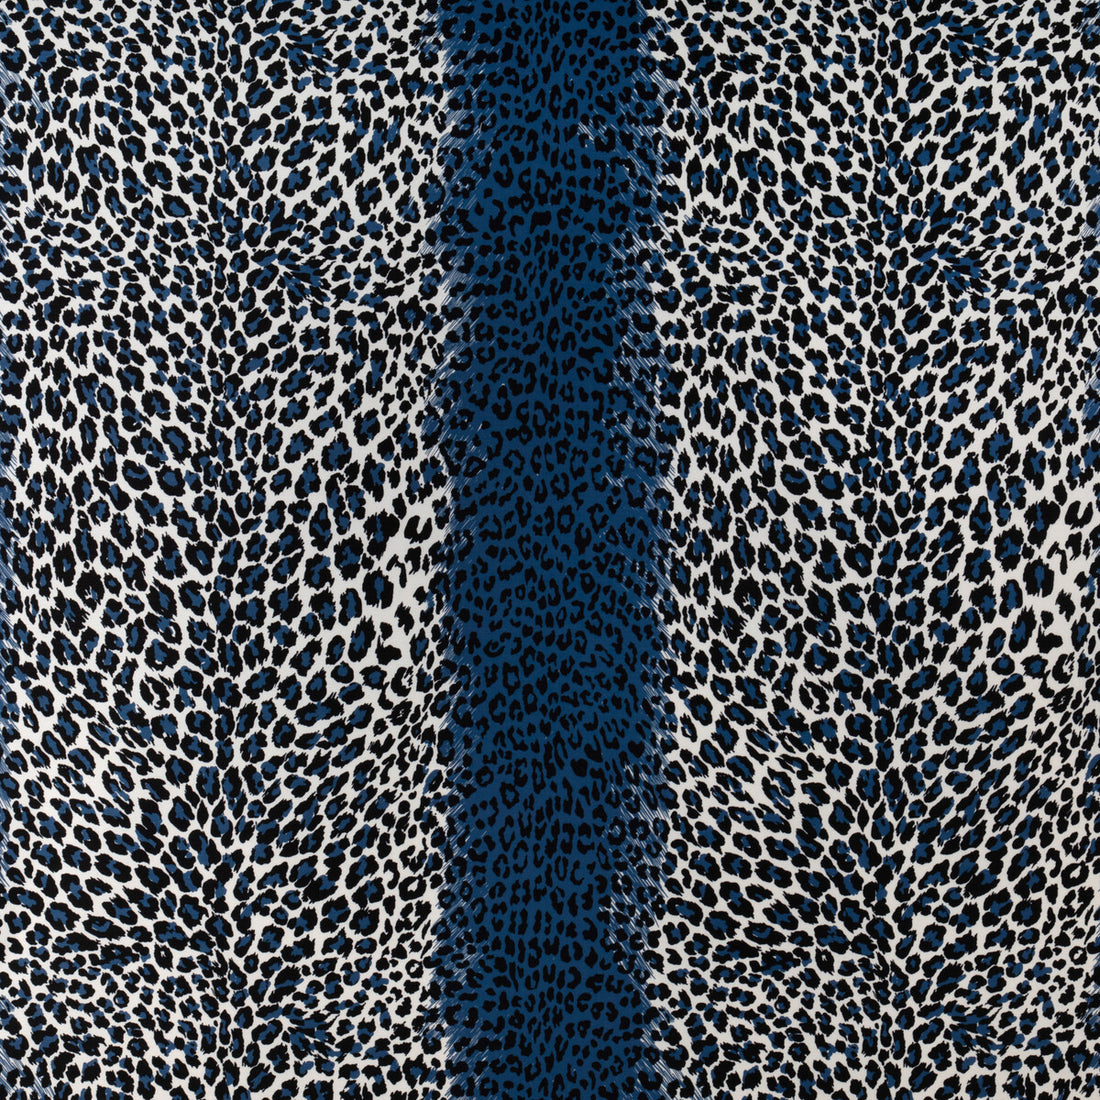 Leopard II fabric in blue color - pattern 8023125.51.0 - by Brunschwig &amp; Fils in the Madeleine Castaing Indoor/Outdoor collection